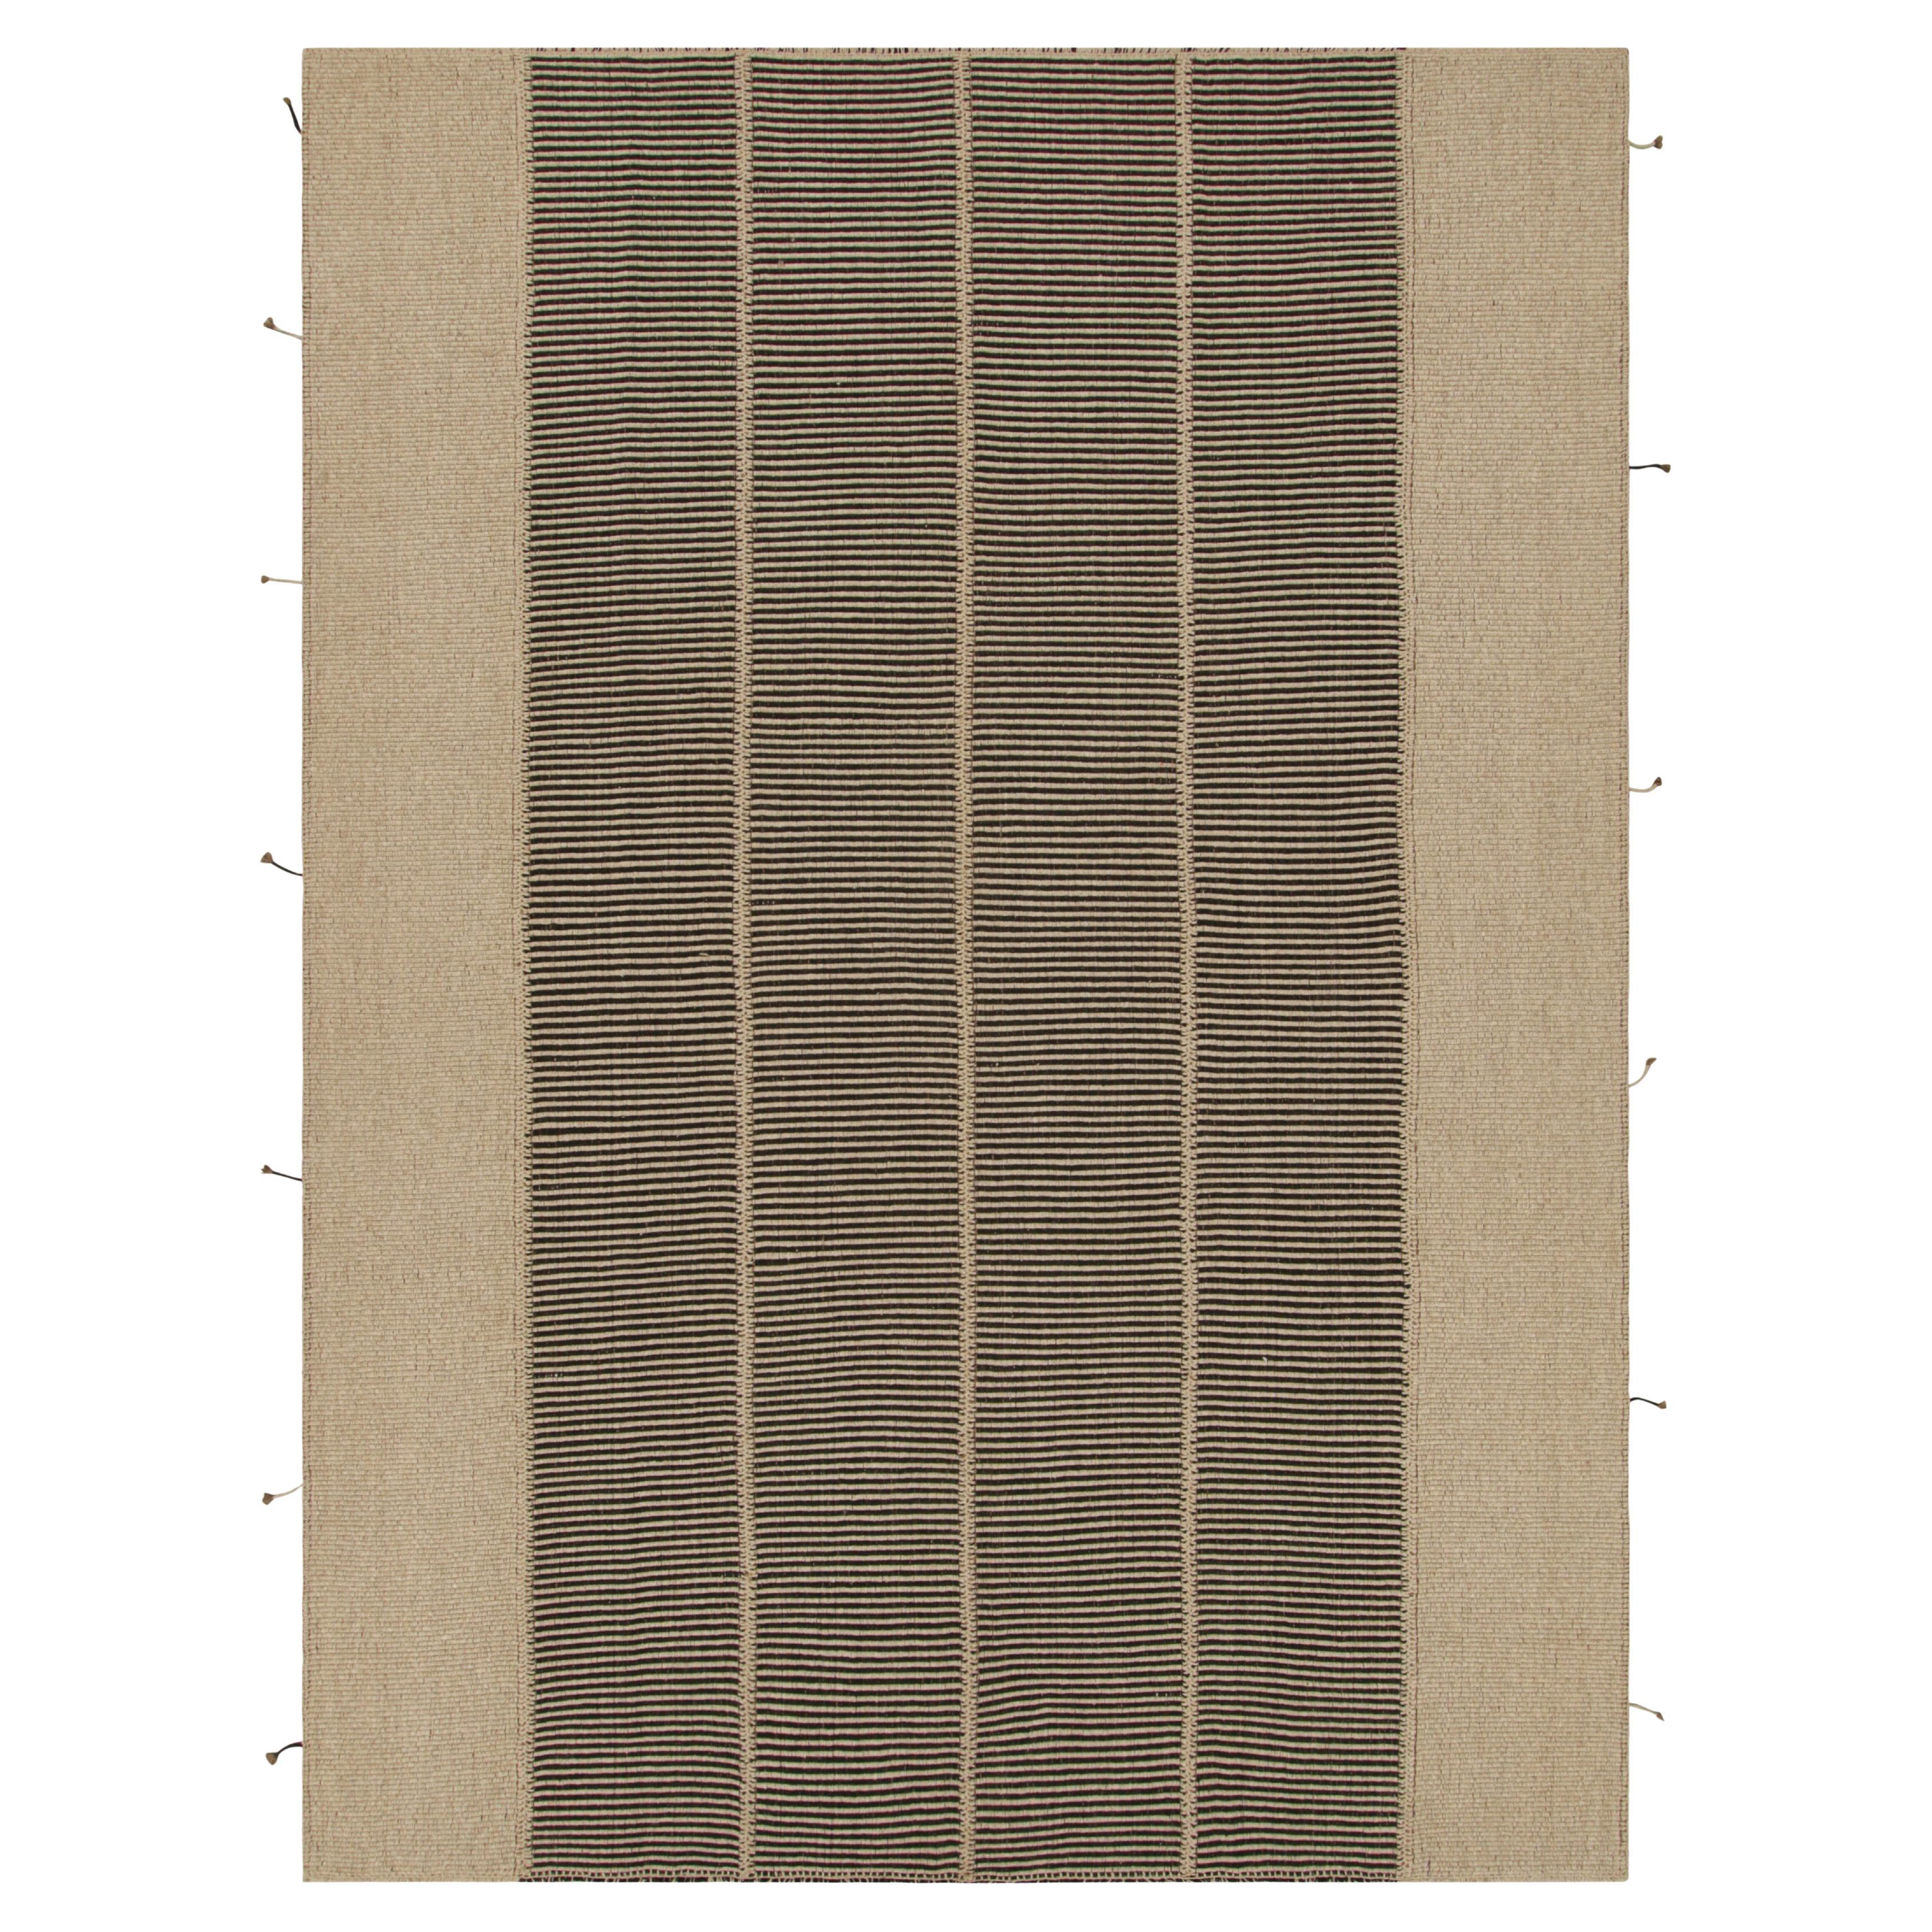 Rug & Kilim’s Contemporary Kilim in Black and Beige Textural Stripes  For Sale